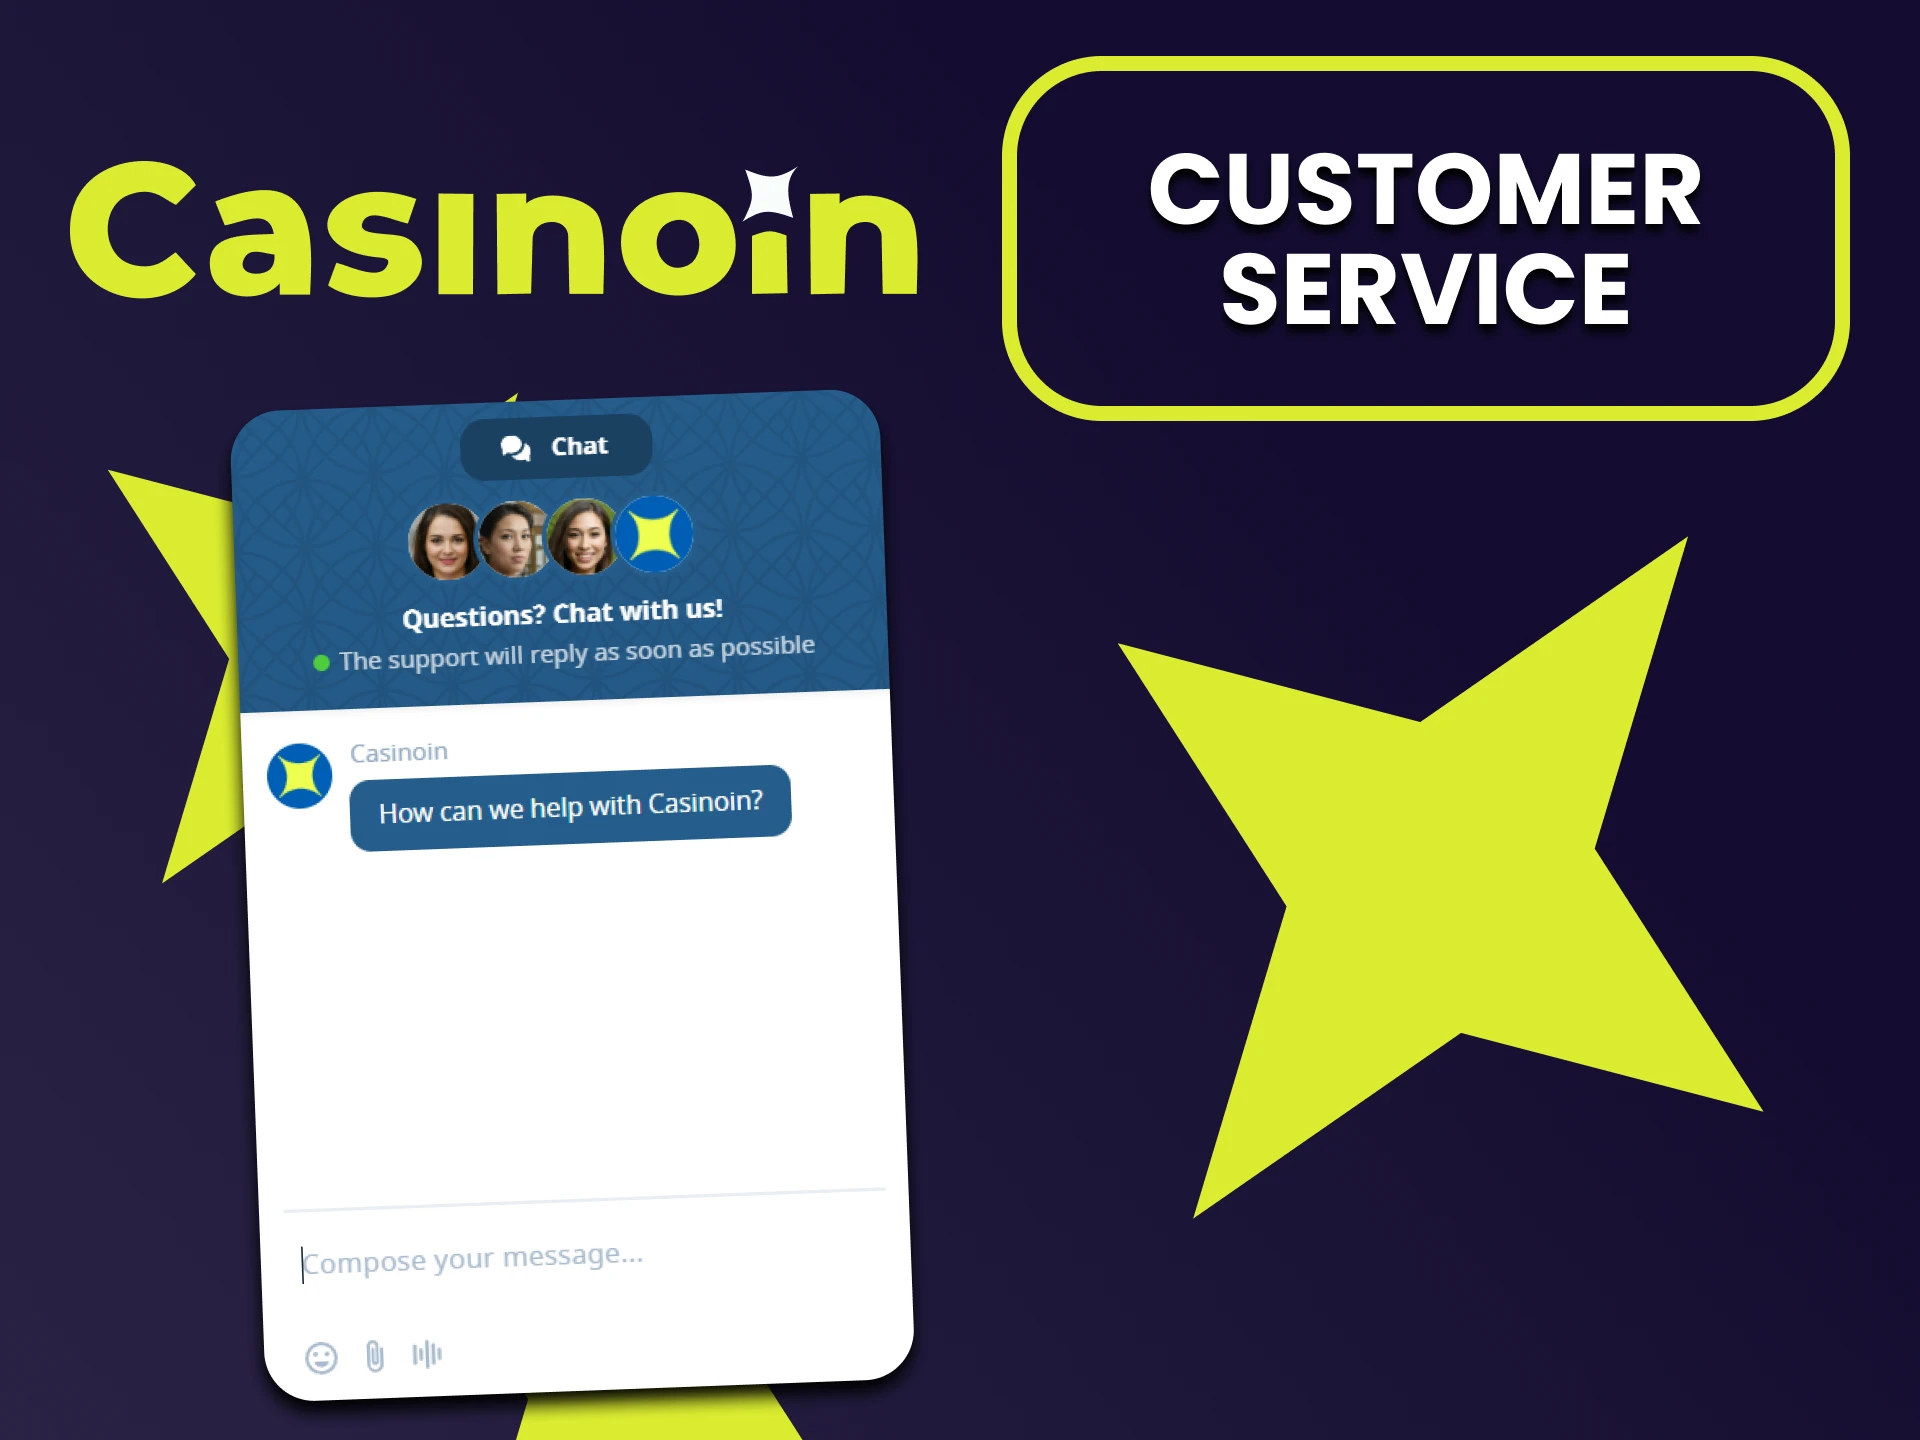 We will tell you how to contact the Casinoin team.